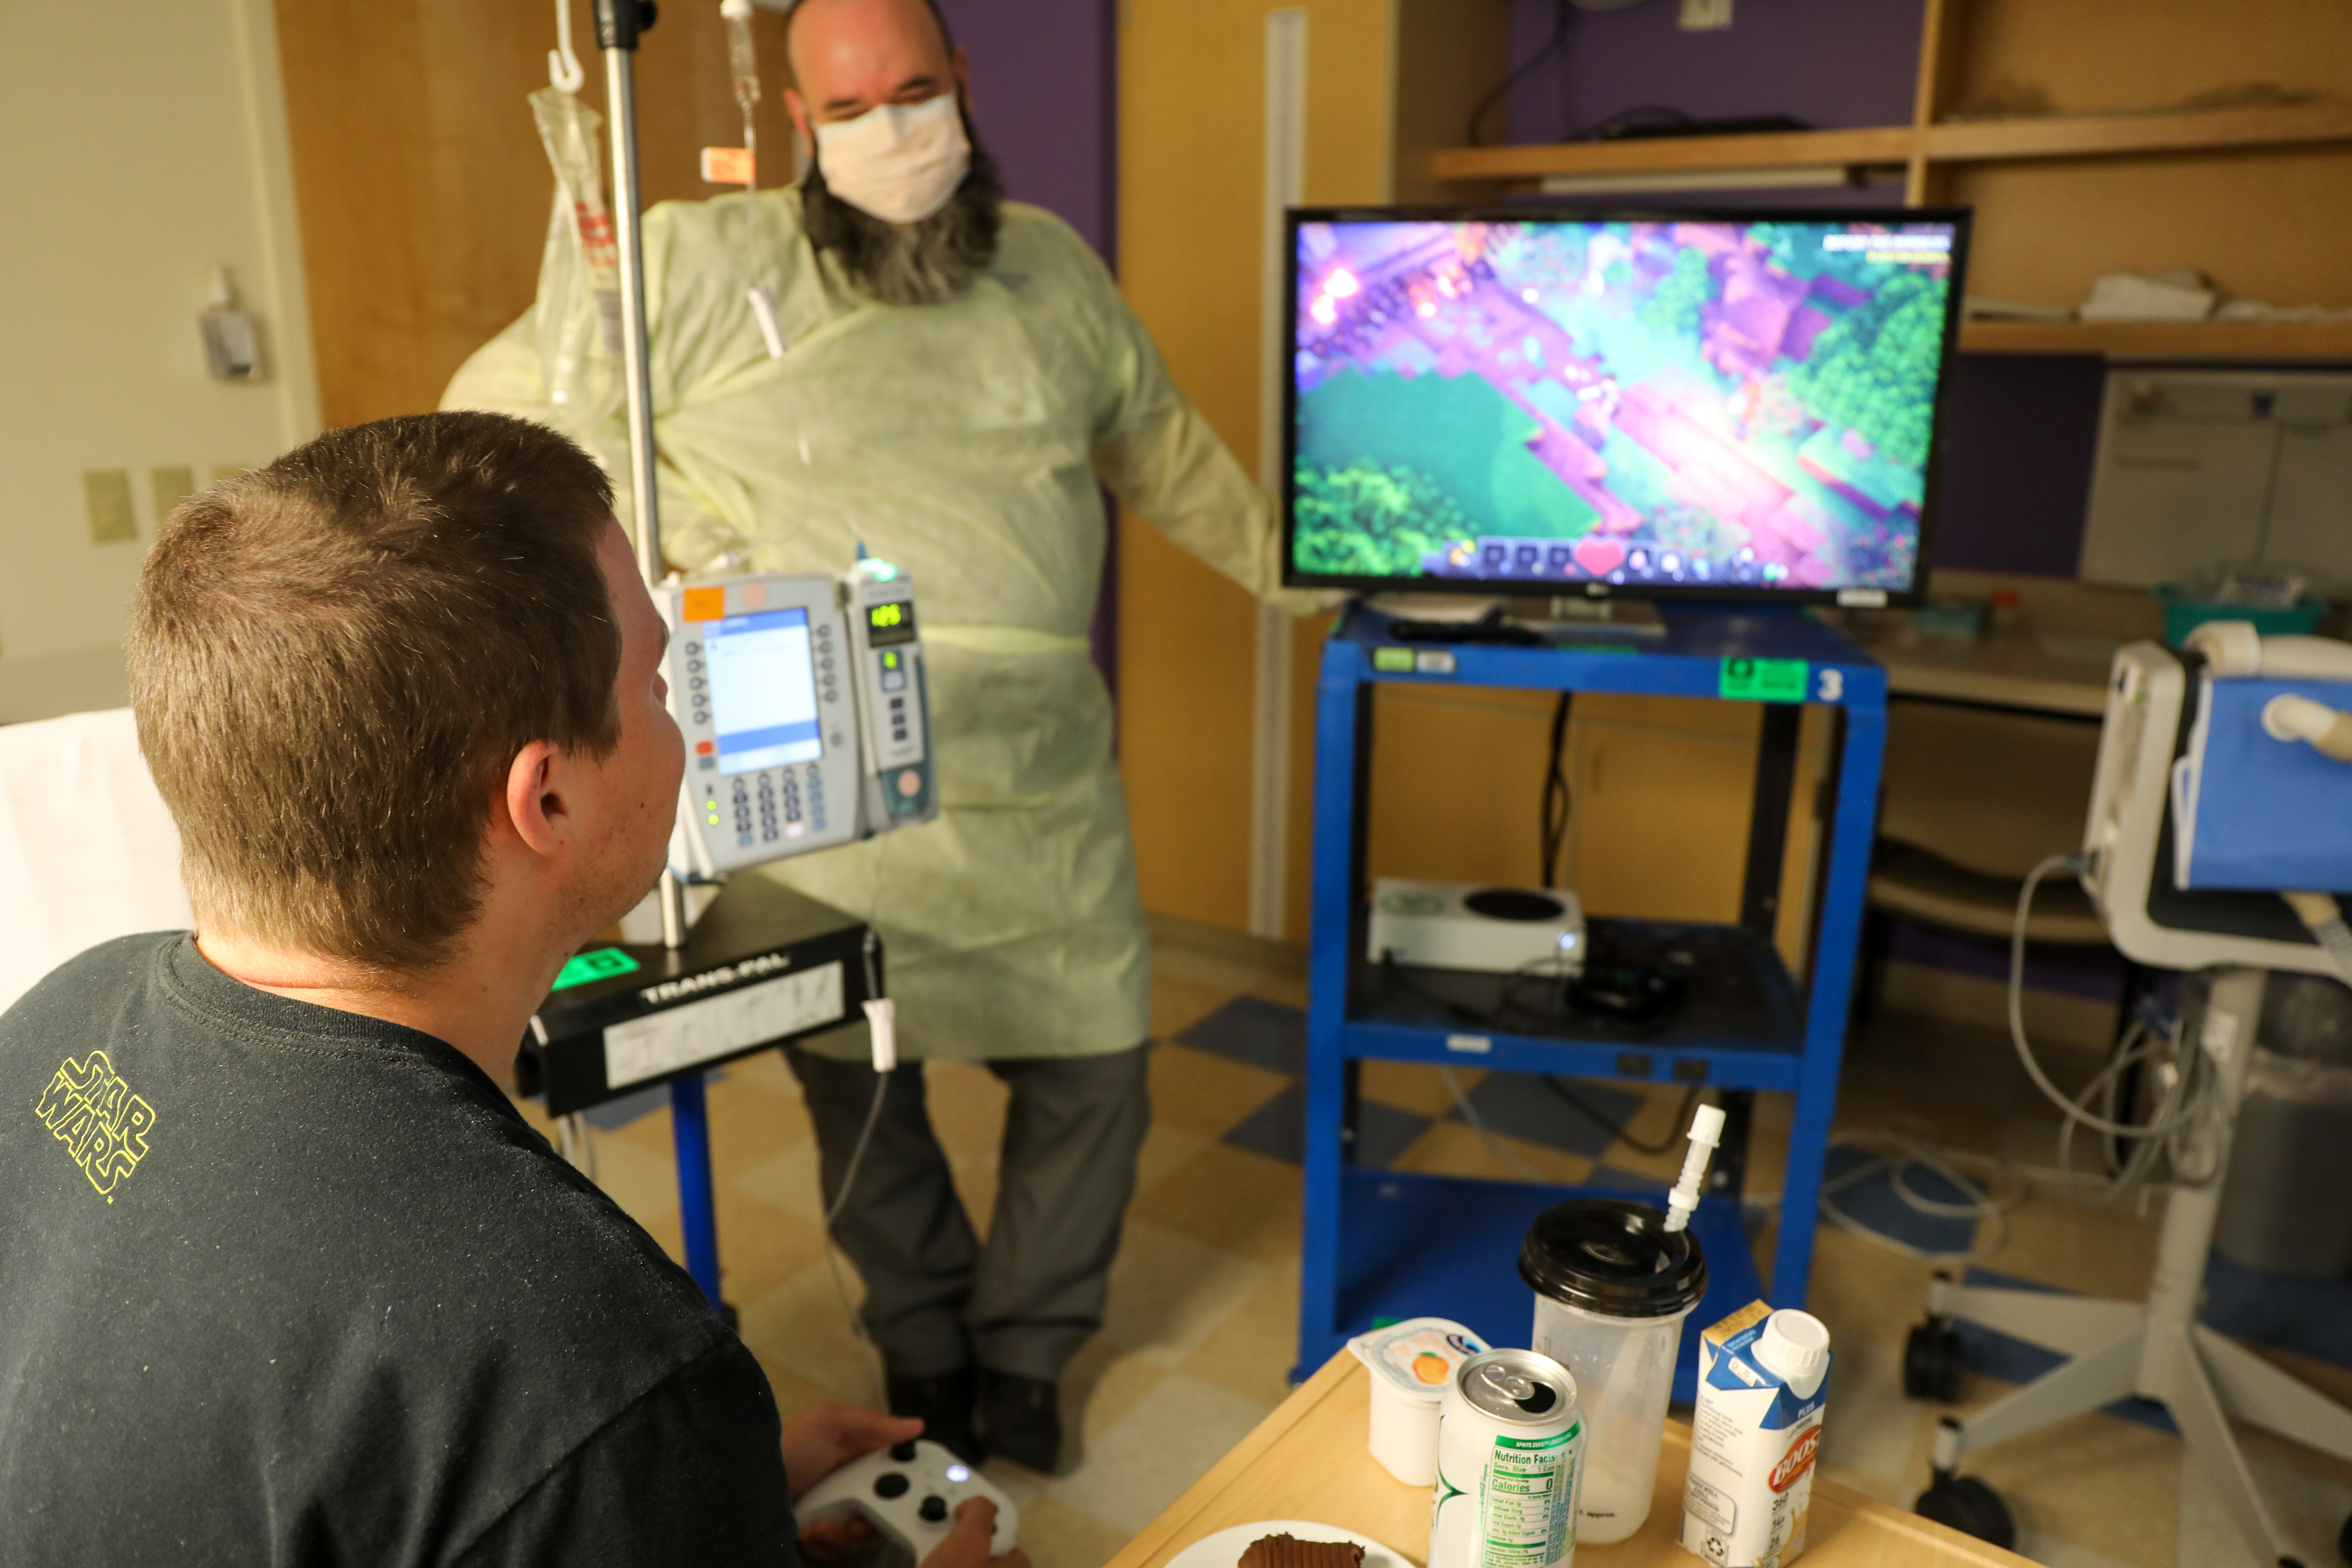 Video games at OHSU help kids cope during medical treatment - OPB